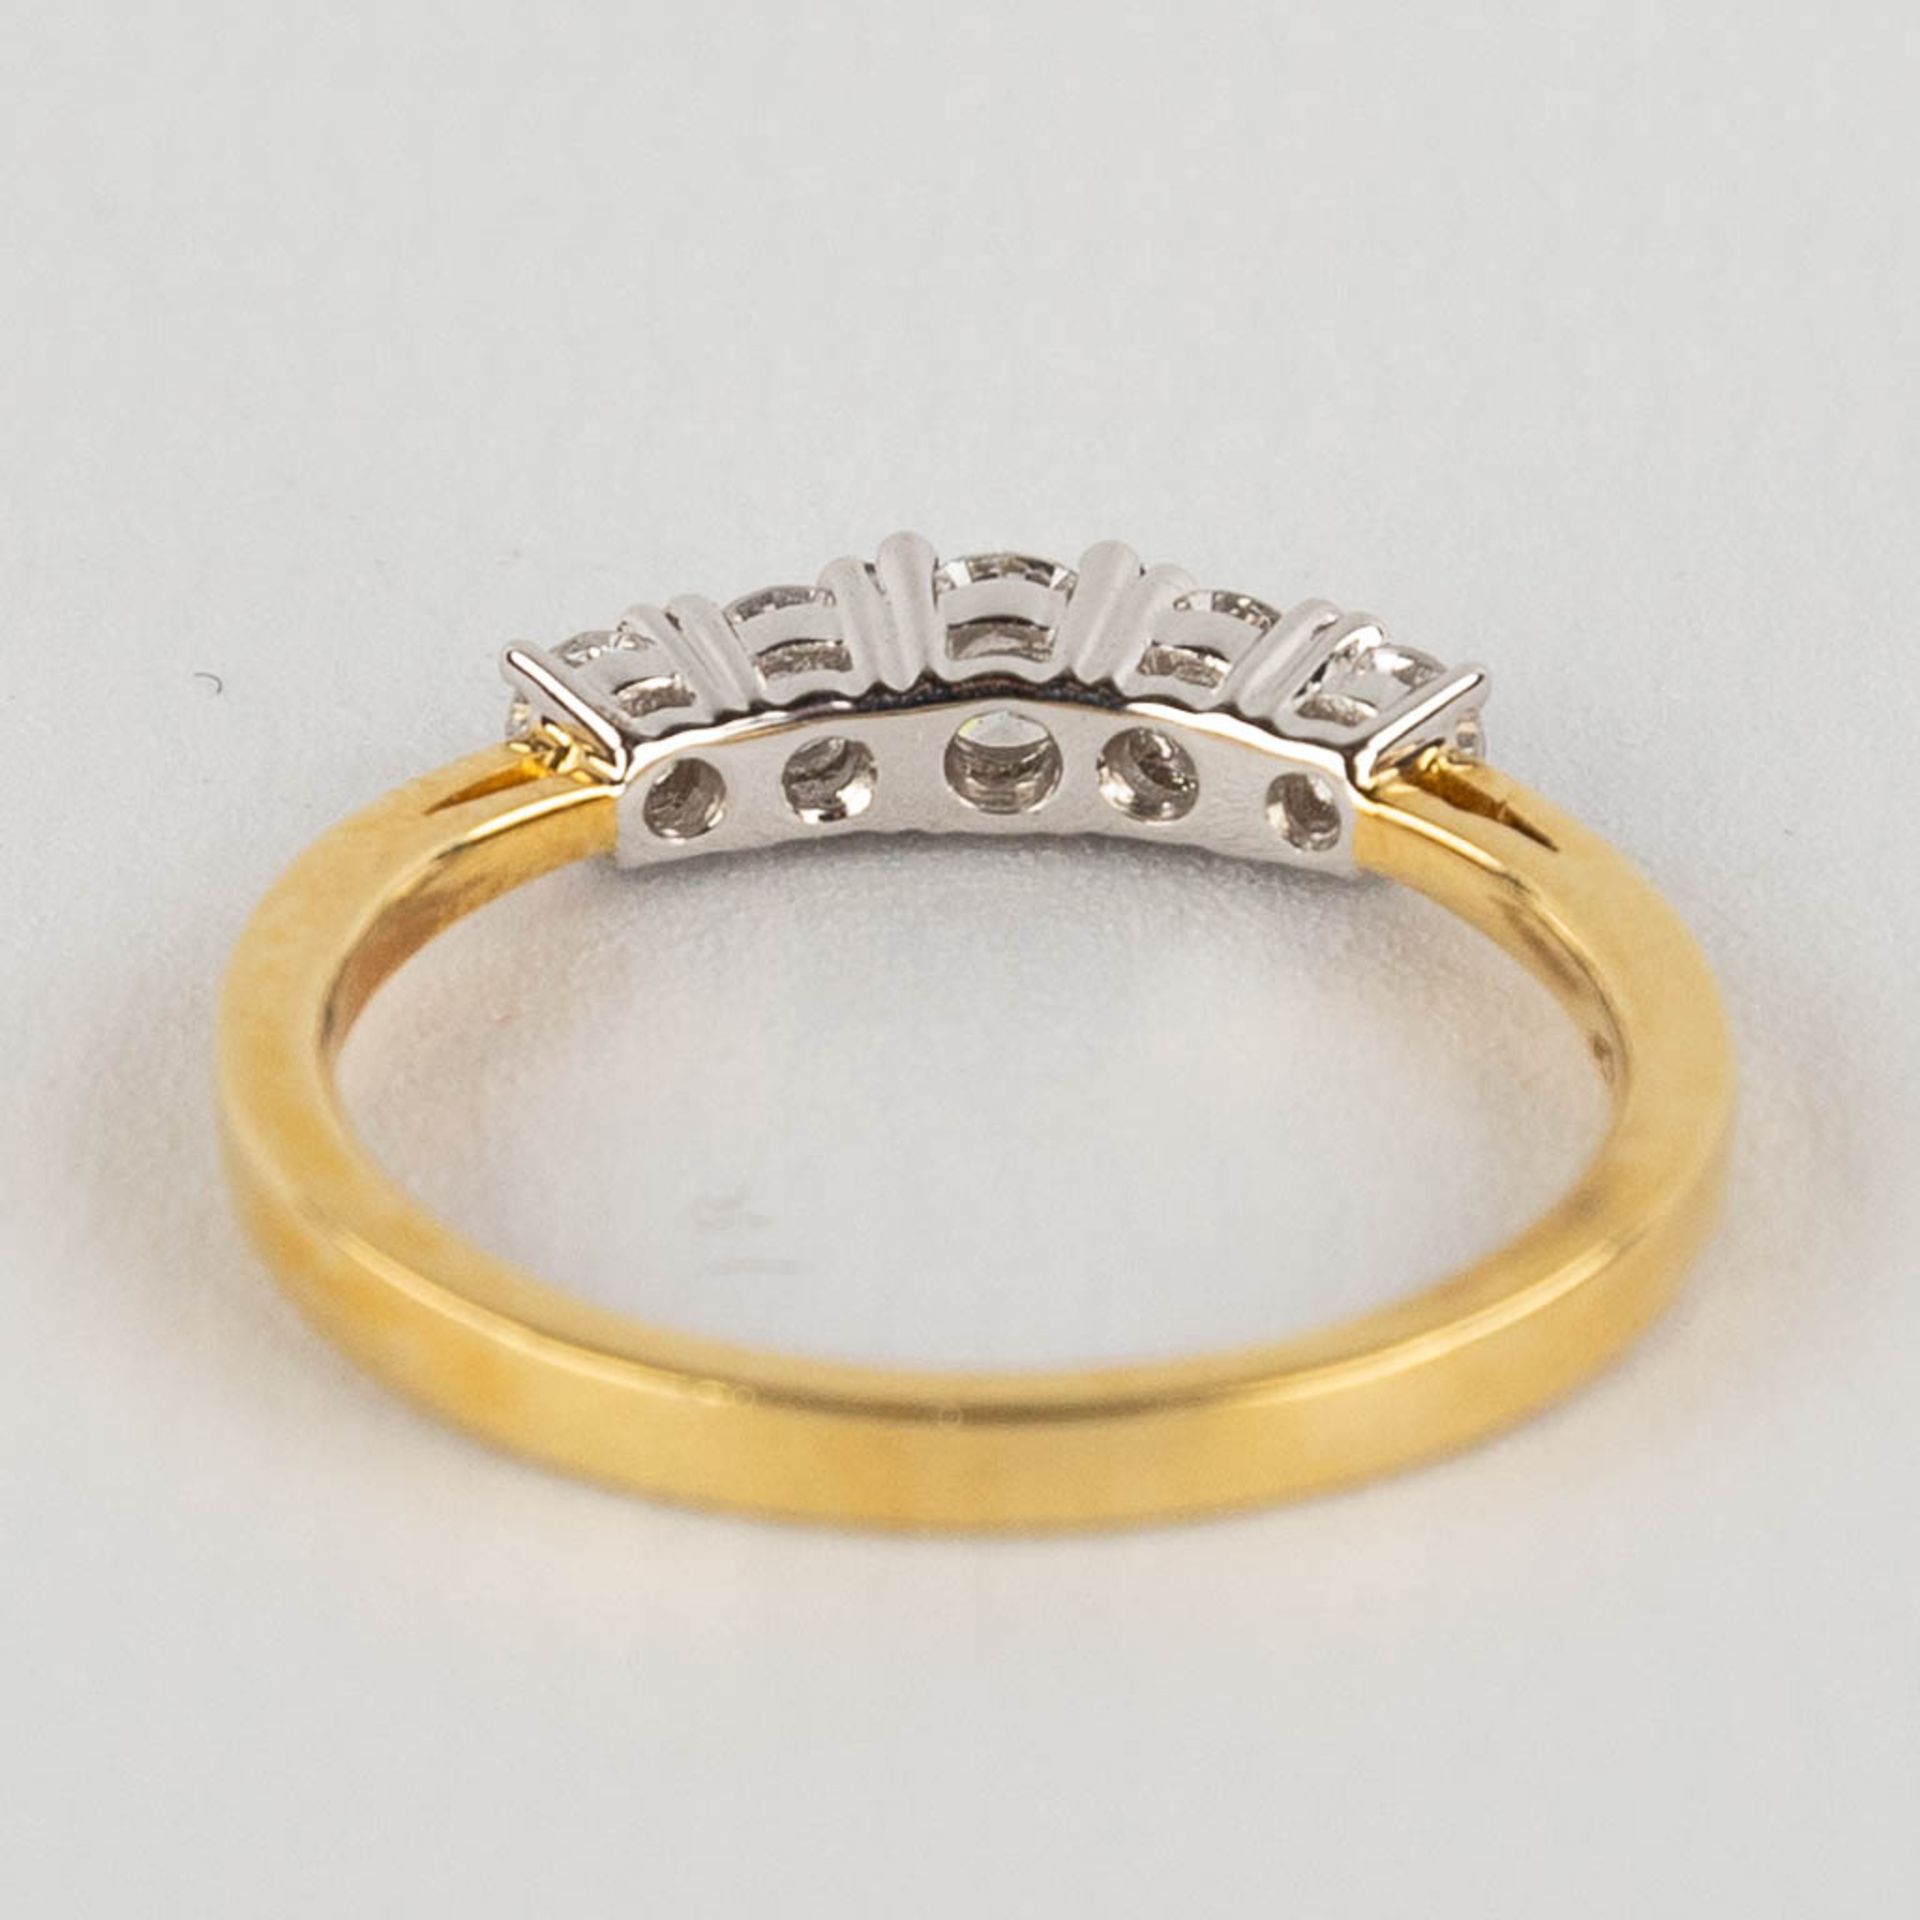 A ring, 18kt yellow and white gold with 5 diamonds, appr. 0,52ct. Ring size 54. - Image 6 of 11